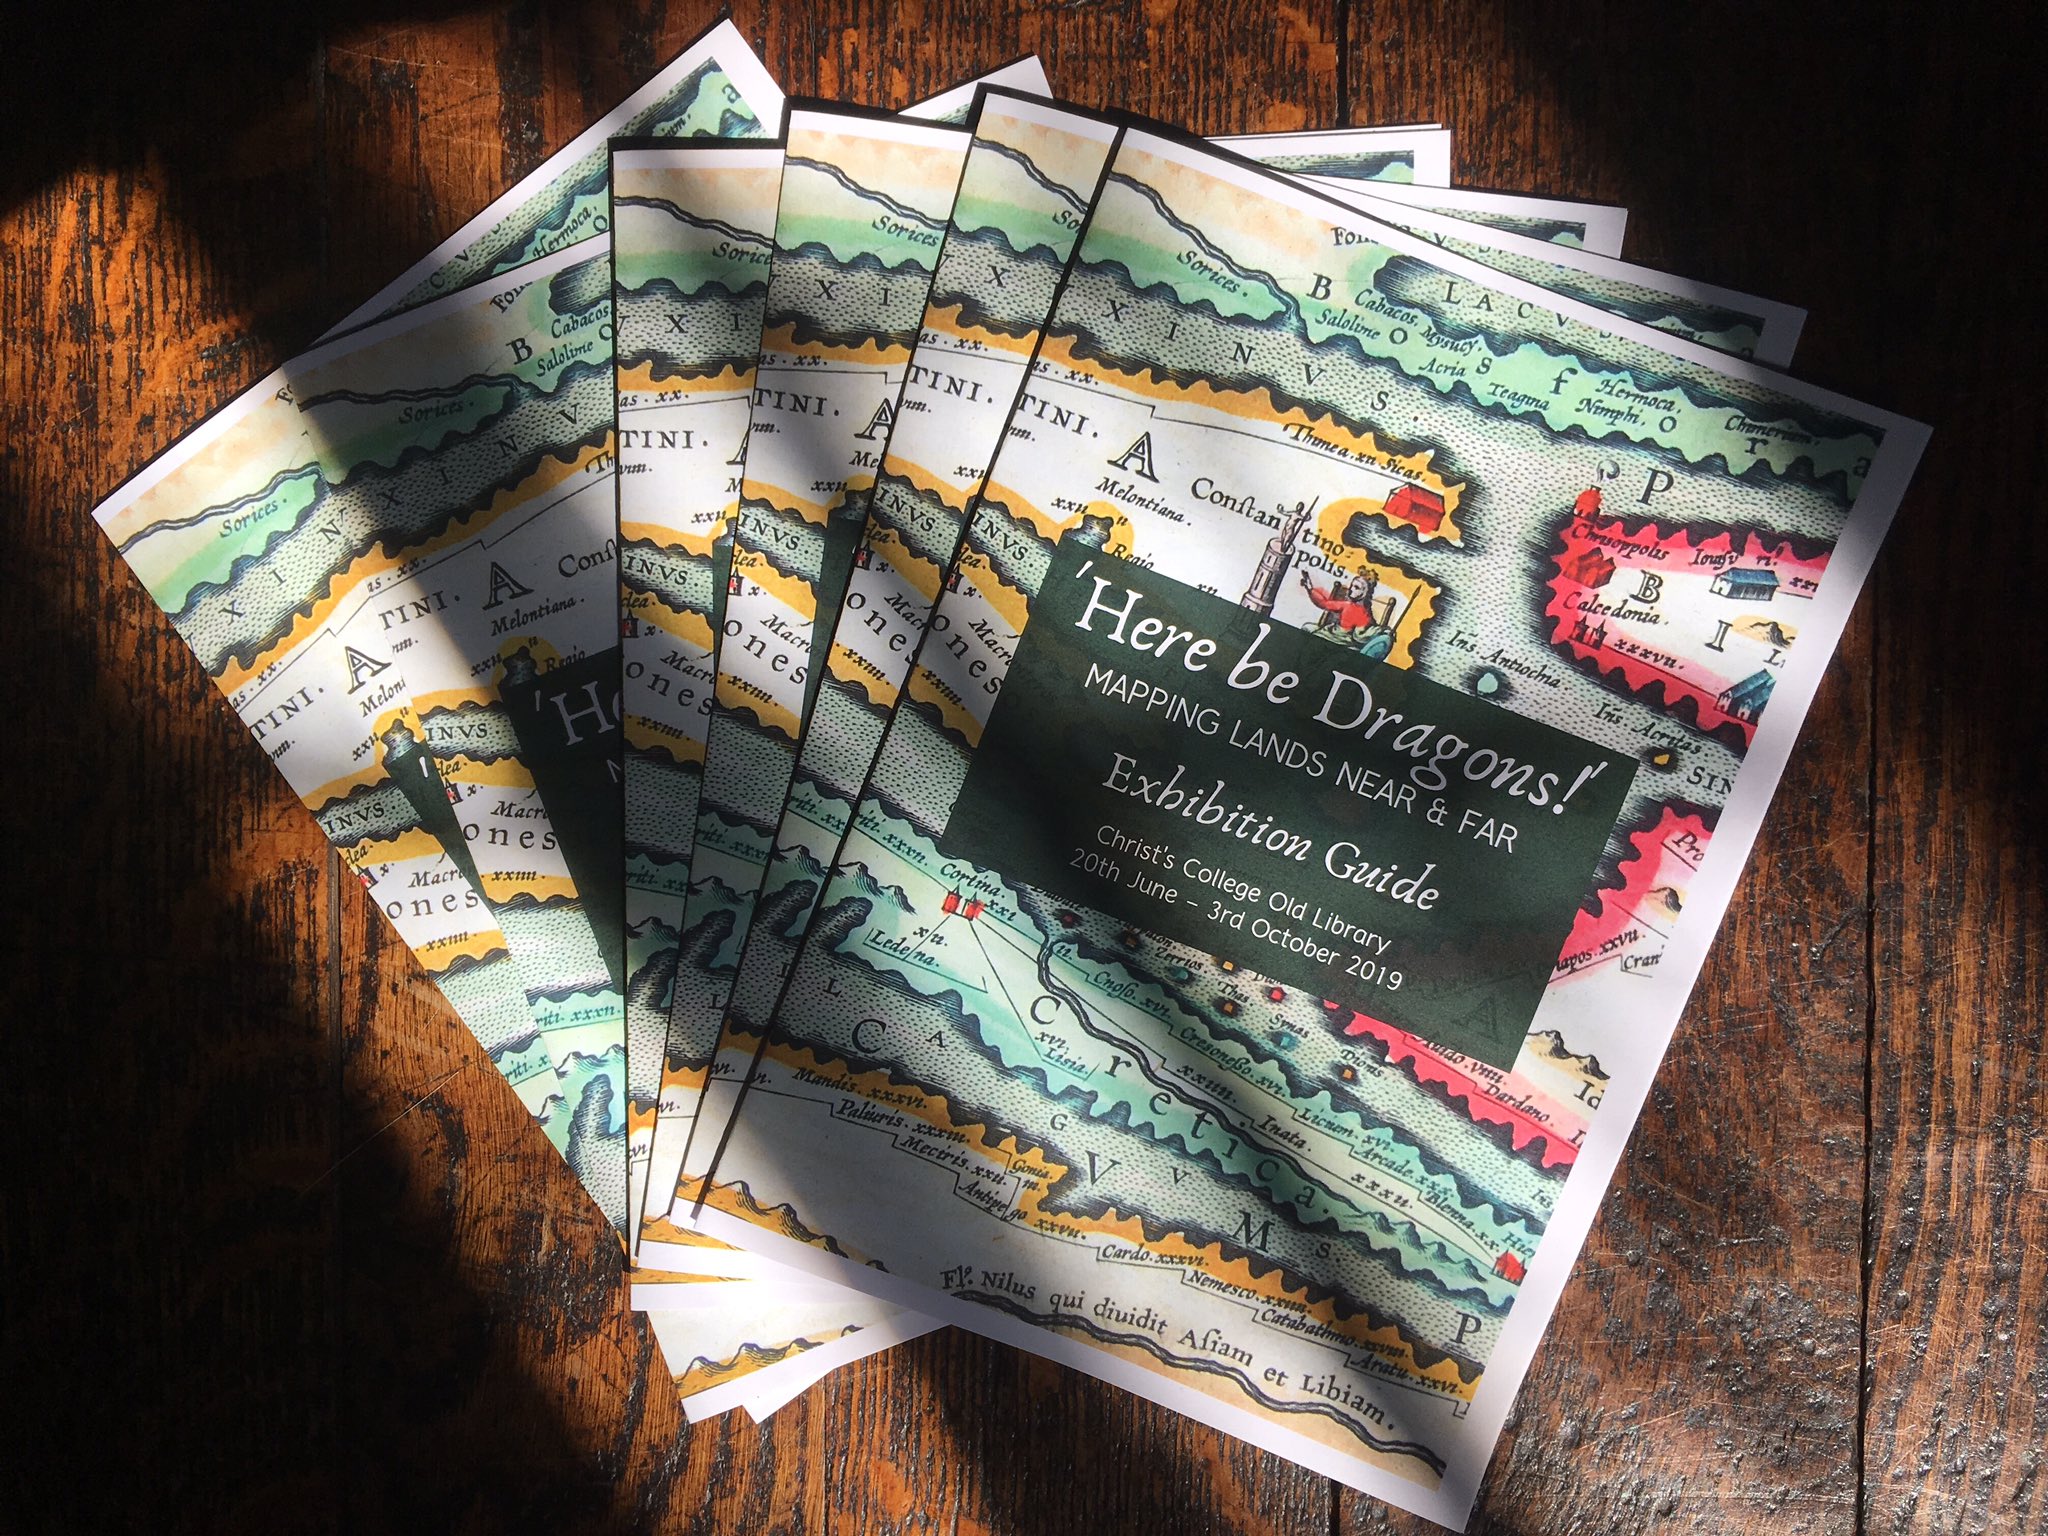 Here be Dragons exhibition leaflets